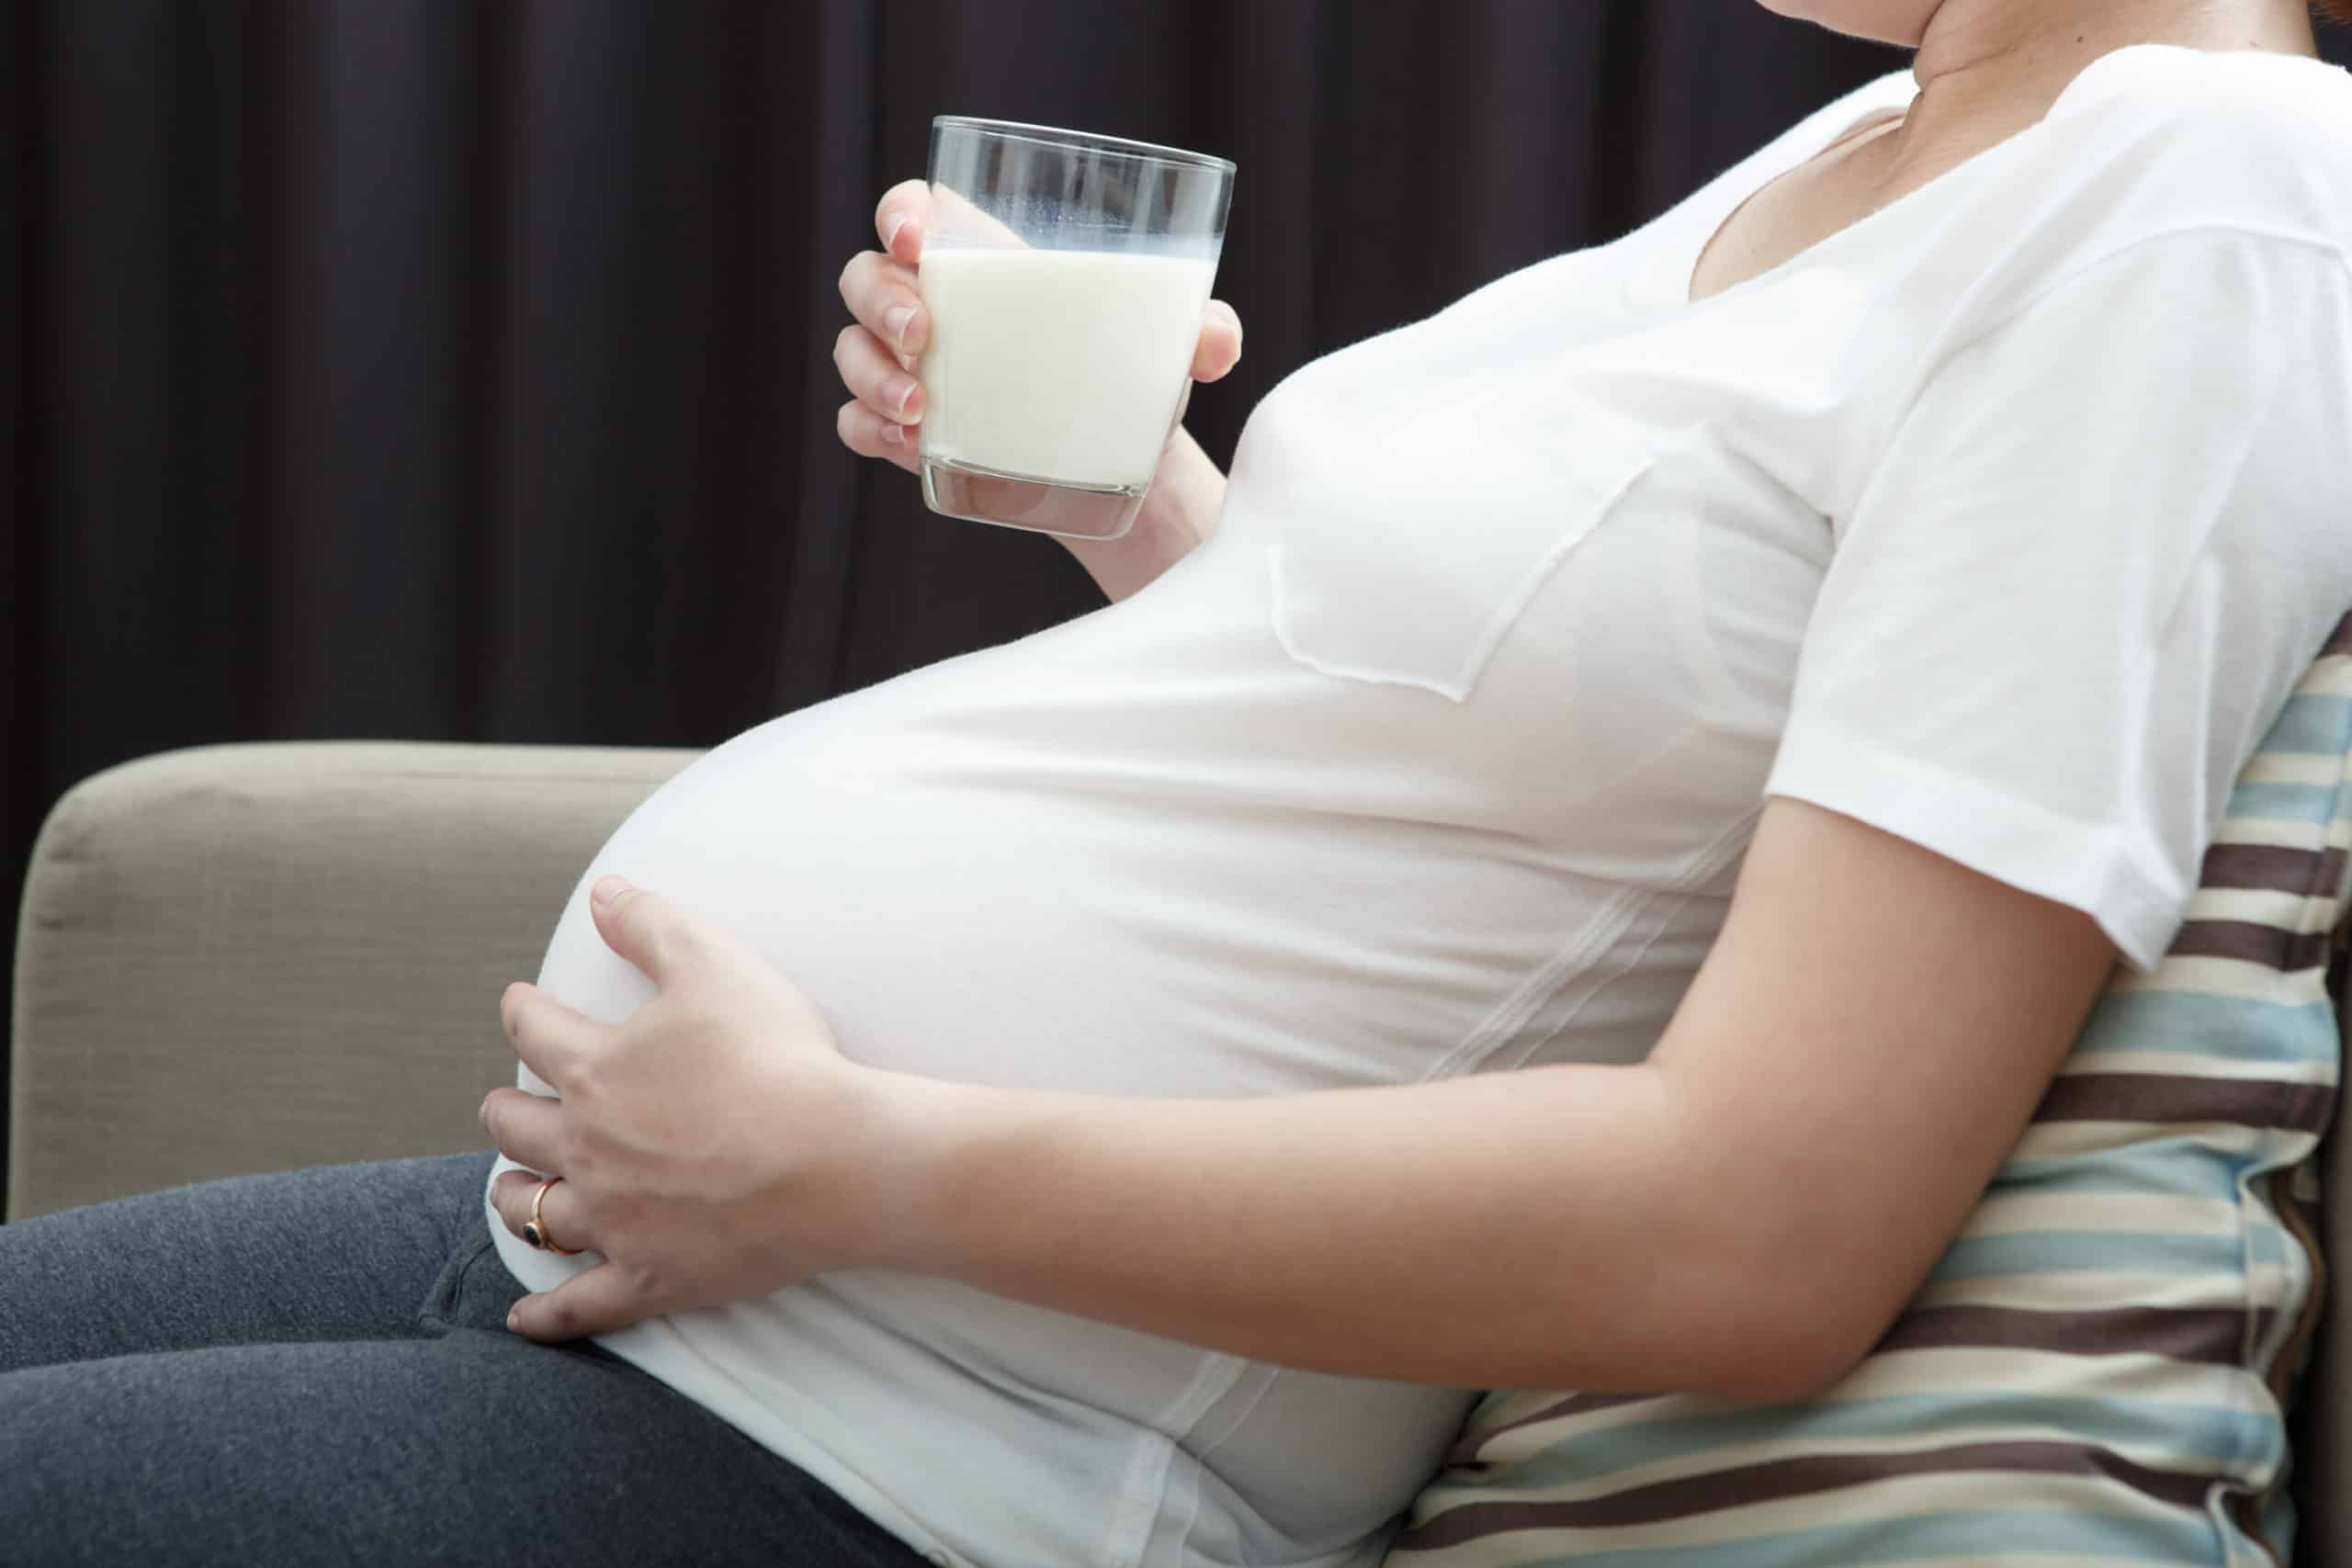 CloCould Carnitine could protect against Autism?se up neck-down shot of pregnant woman in white t-shirt sitting on couch holding a glass of milk